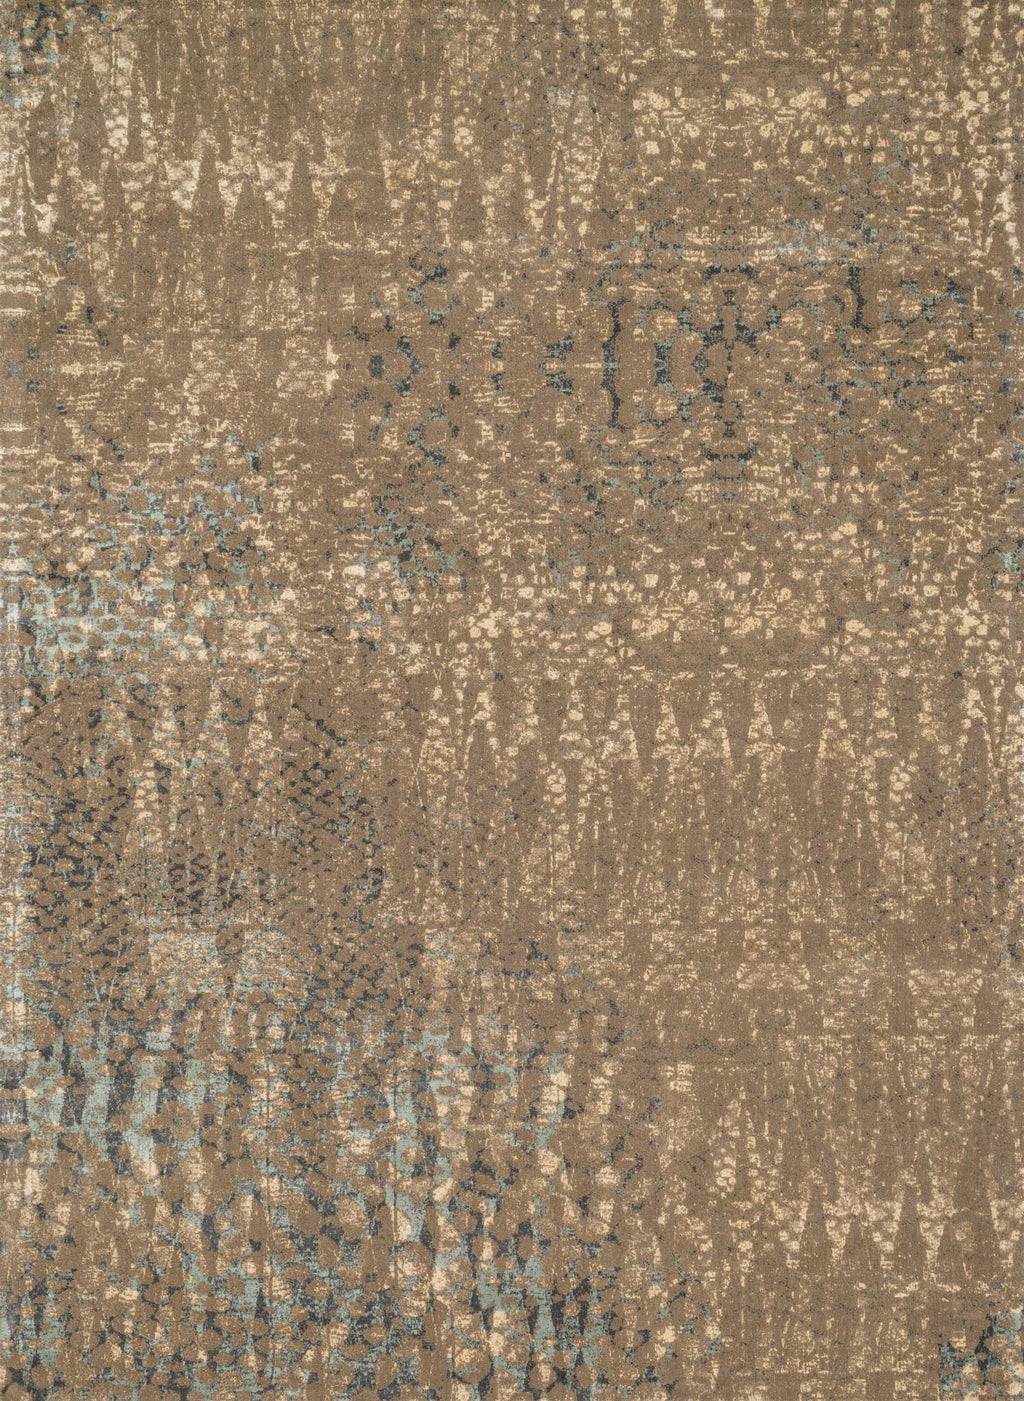 JOURNEY Collection Wool/Viscose Rug  in  STONE / BLUE Gray Runner Machine-Made Wool/Viscose